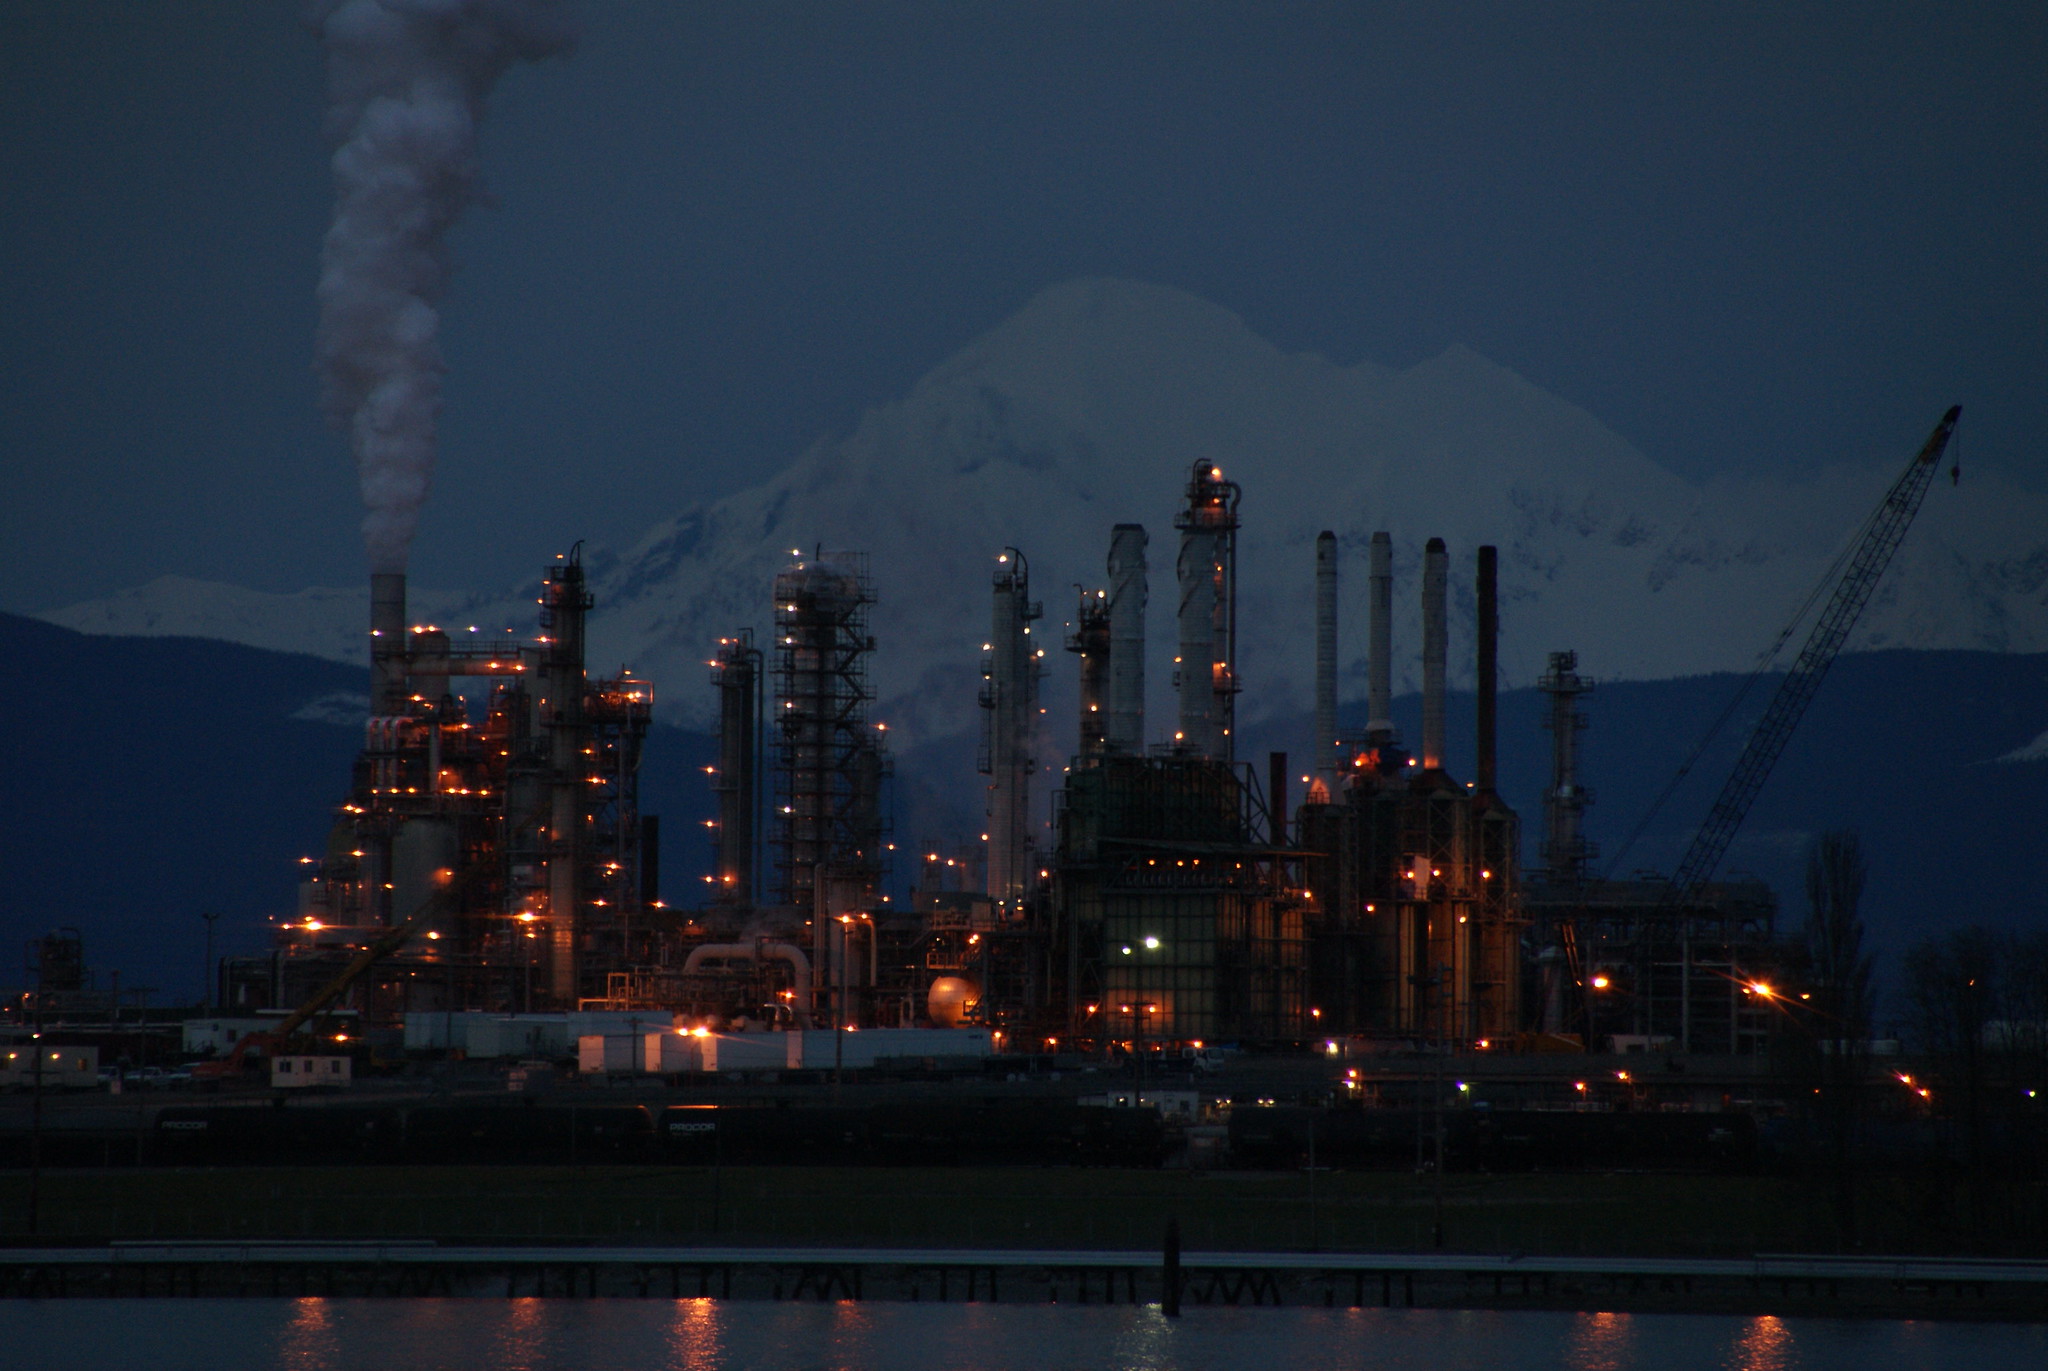 Photo of oil refinery in Anacortes at night, with a plume of smoke emanating from one of the stacks